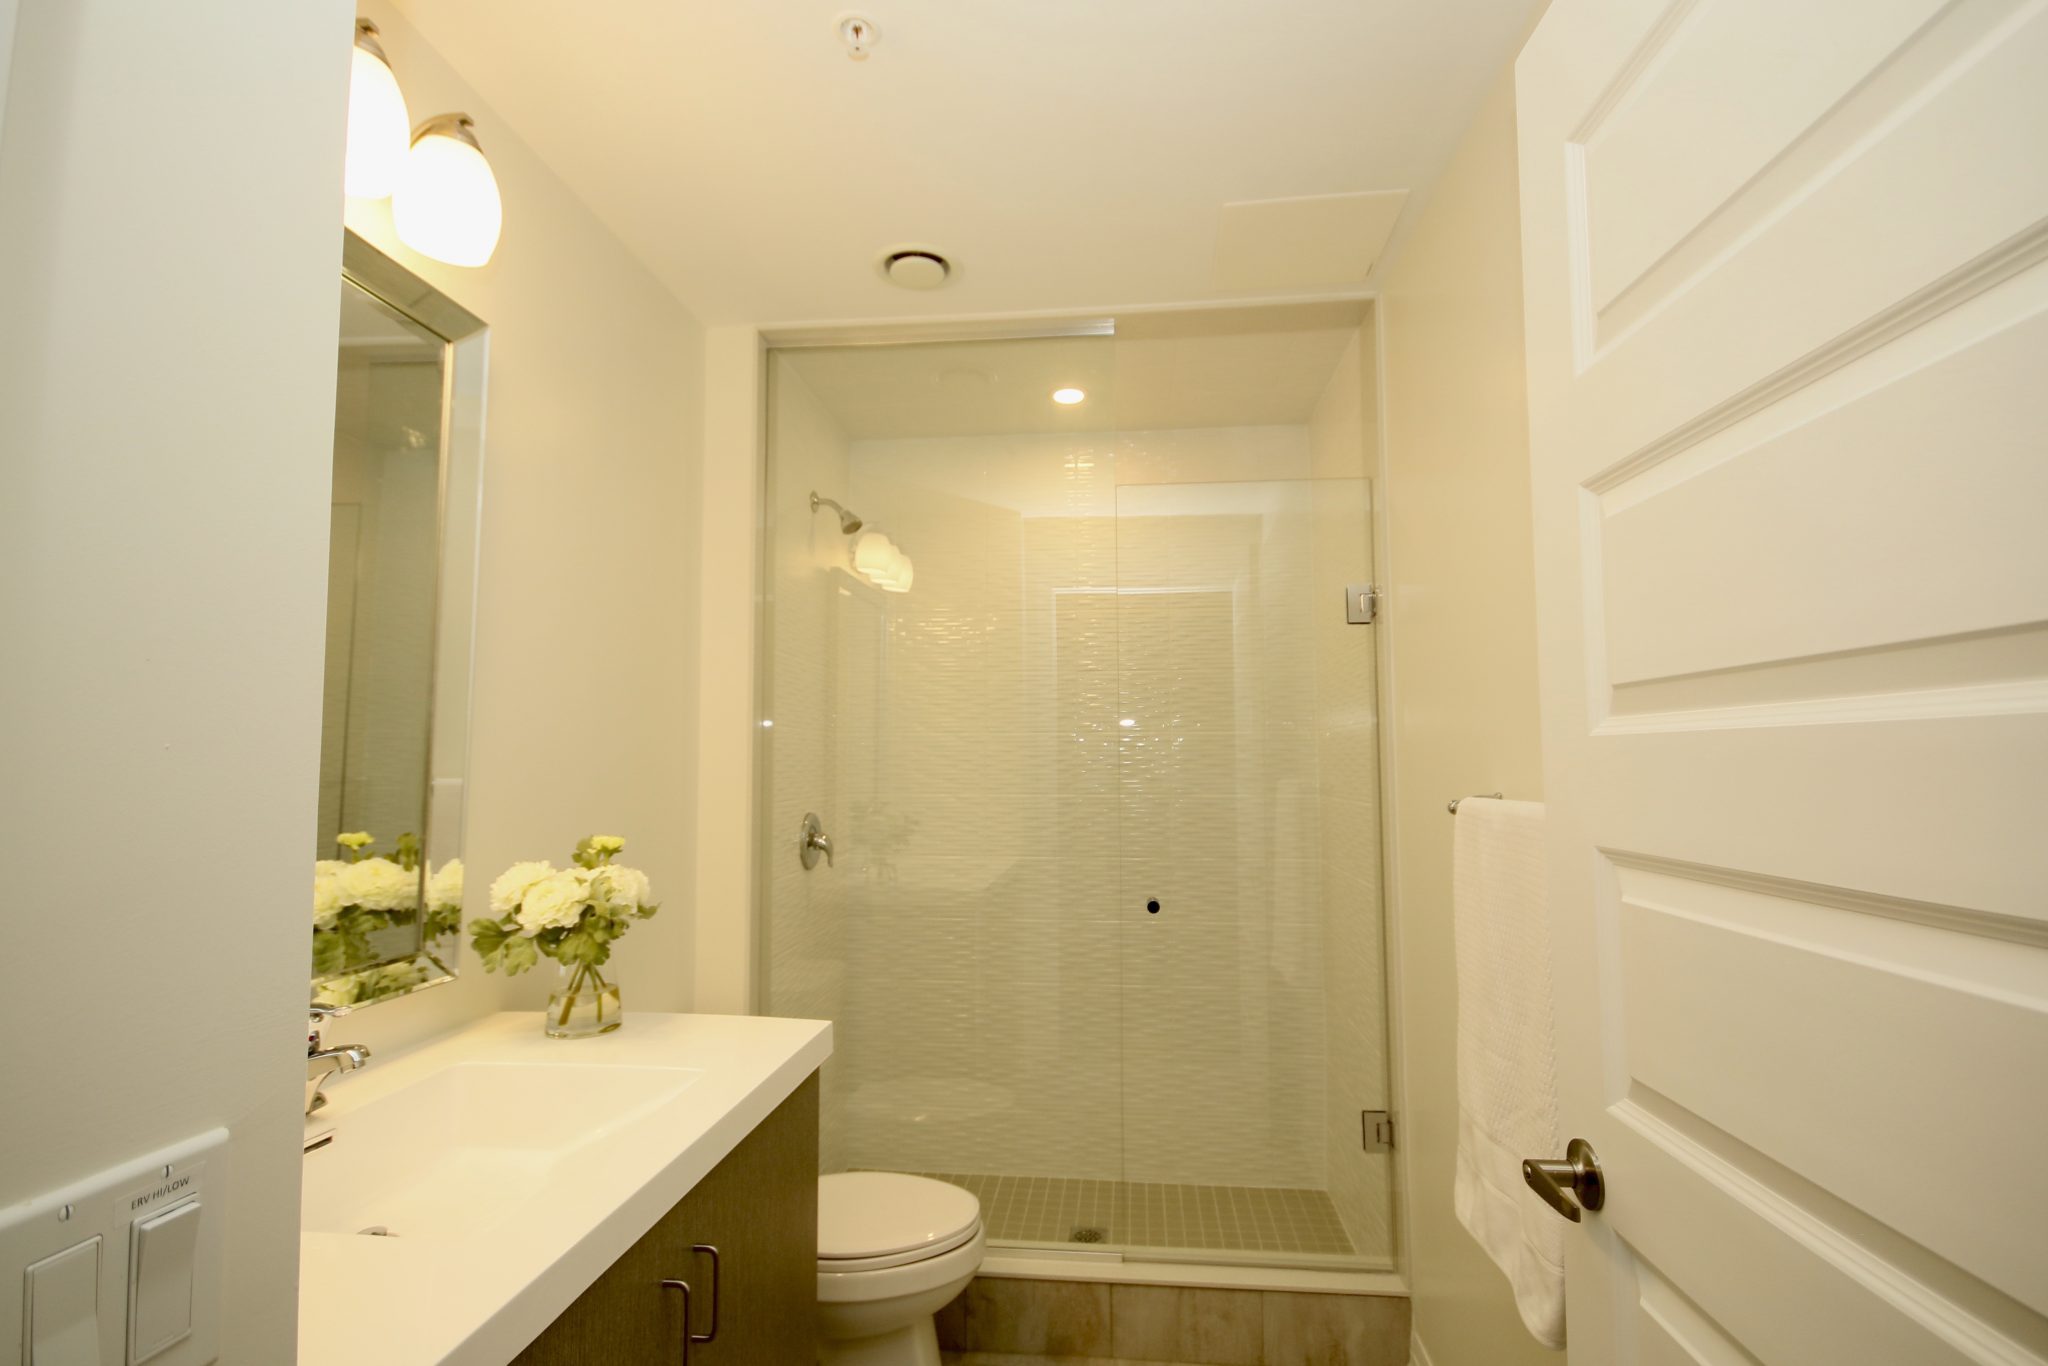 Large bathroom with standup shower.